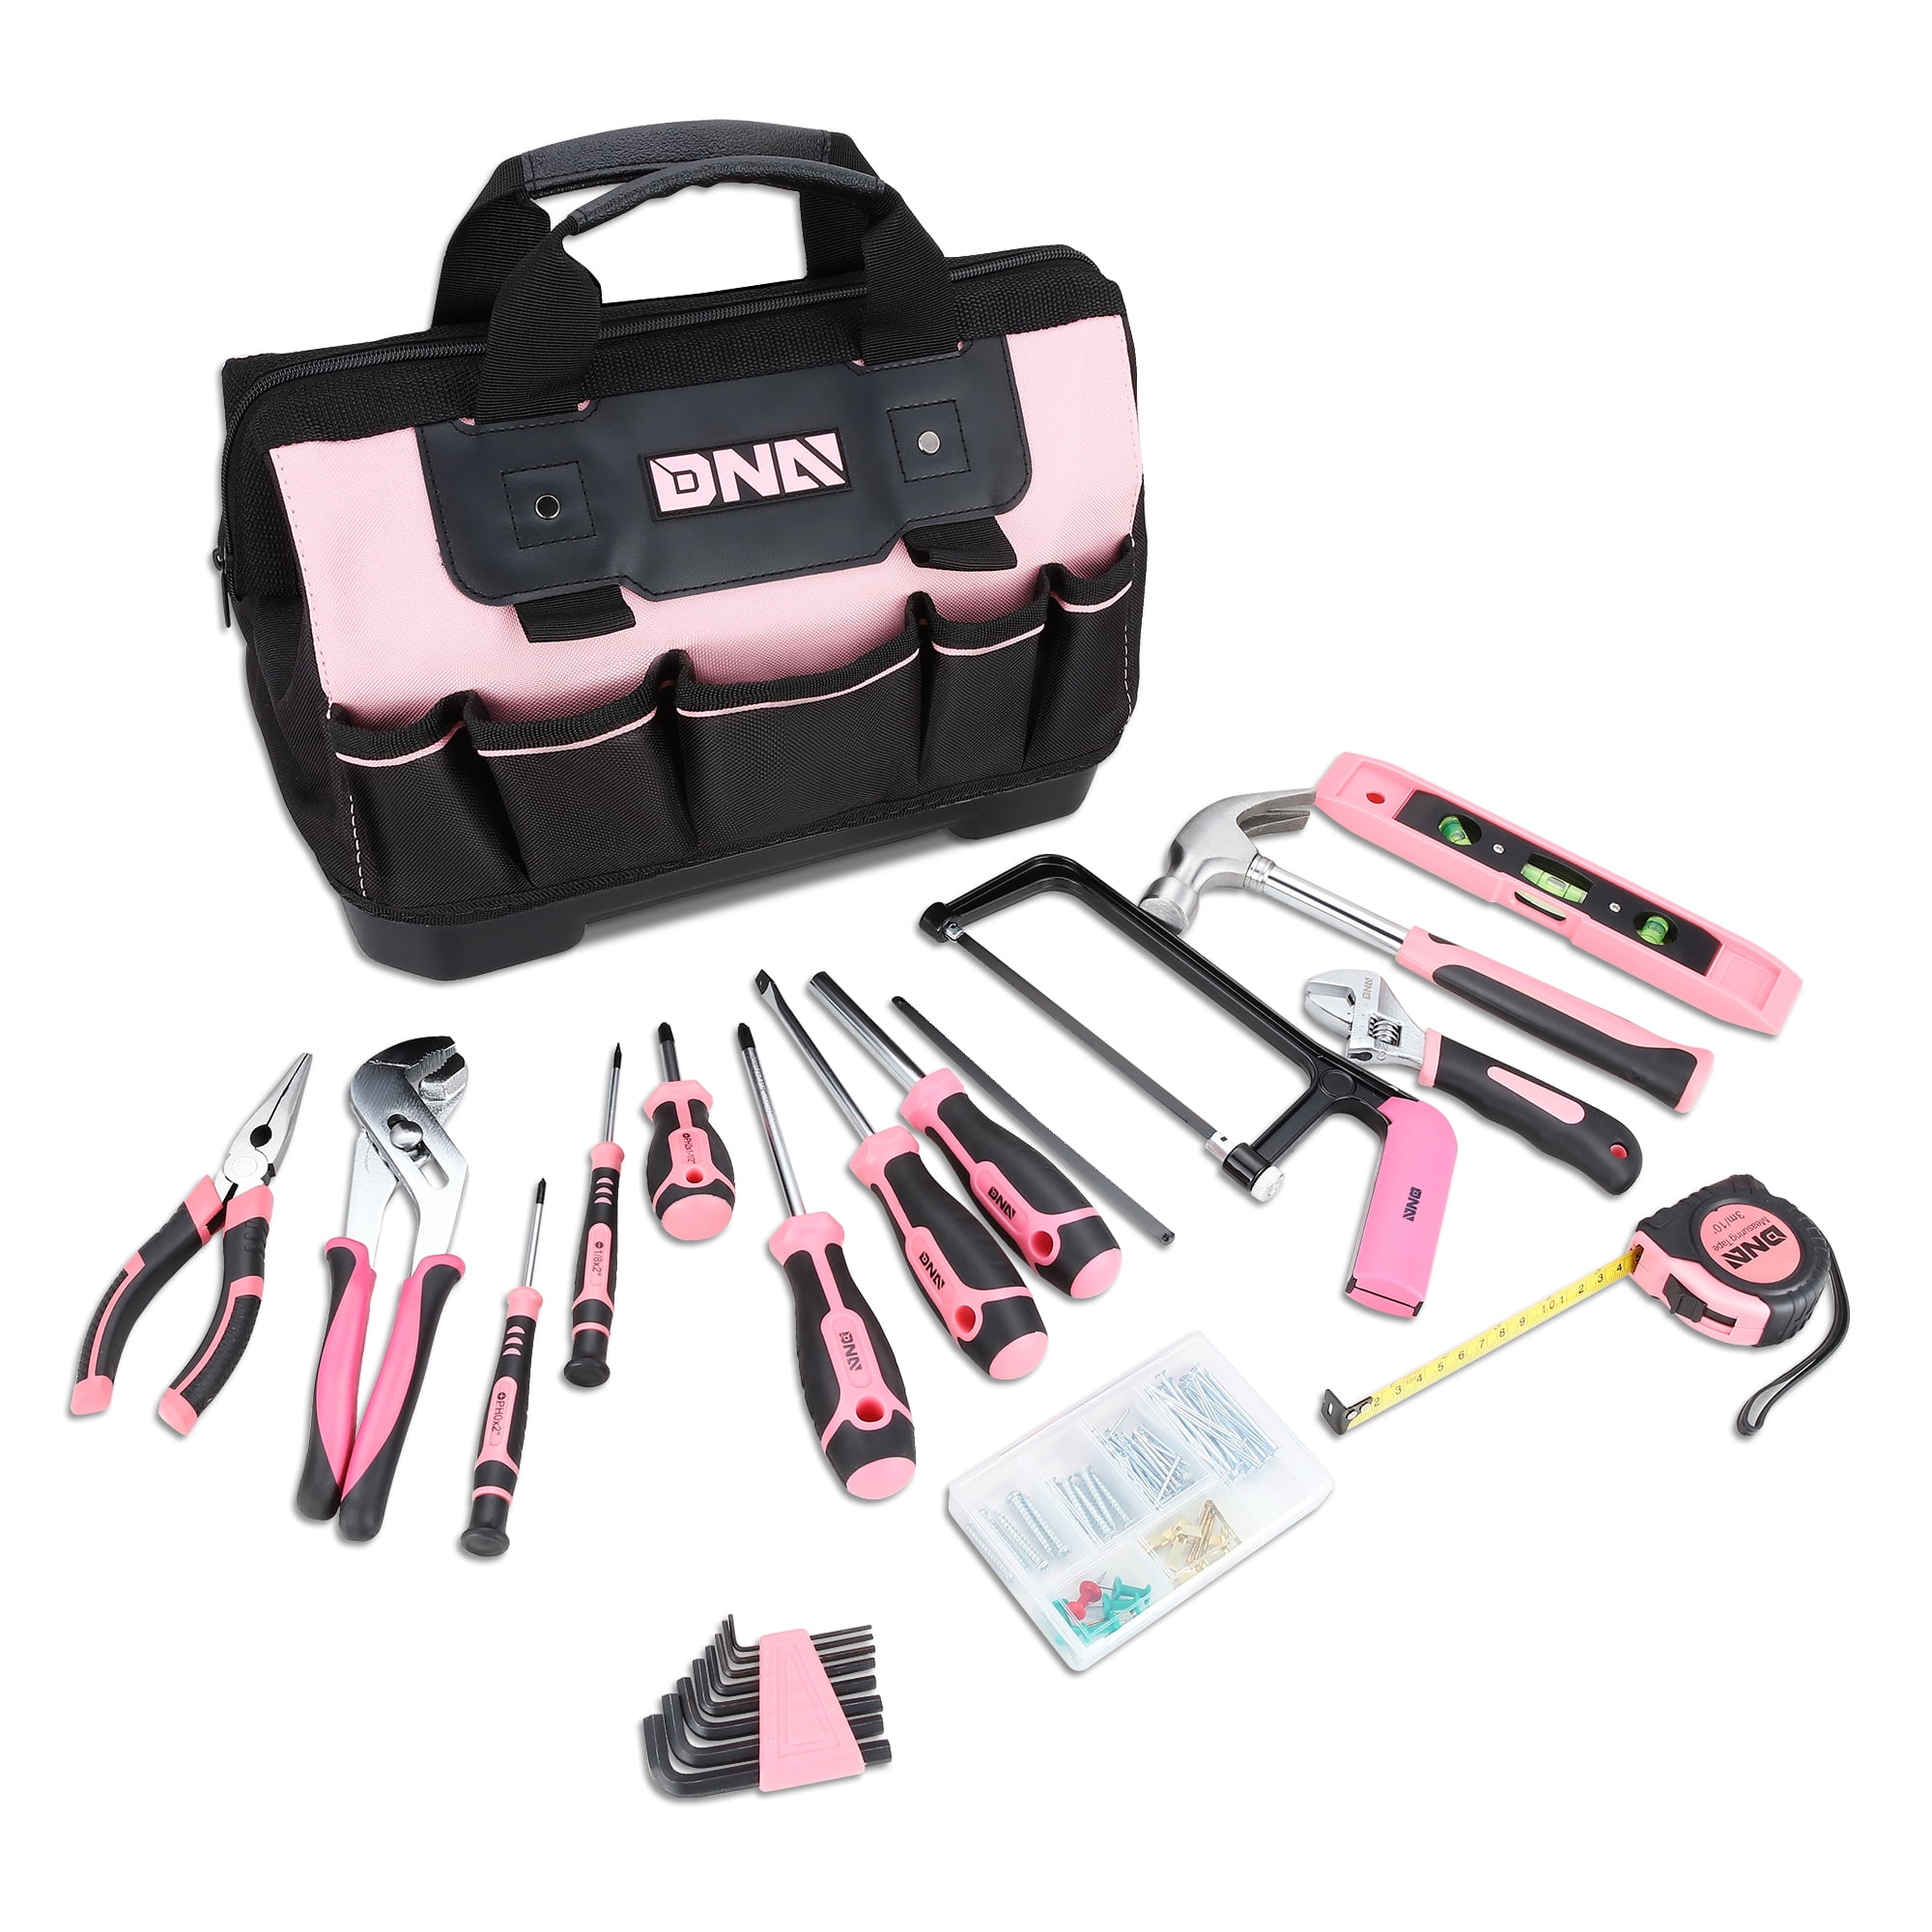 DNA Motoring 21 Piece Household Home Repairing Tool Set And Canvas Storage  Bag